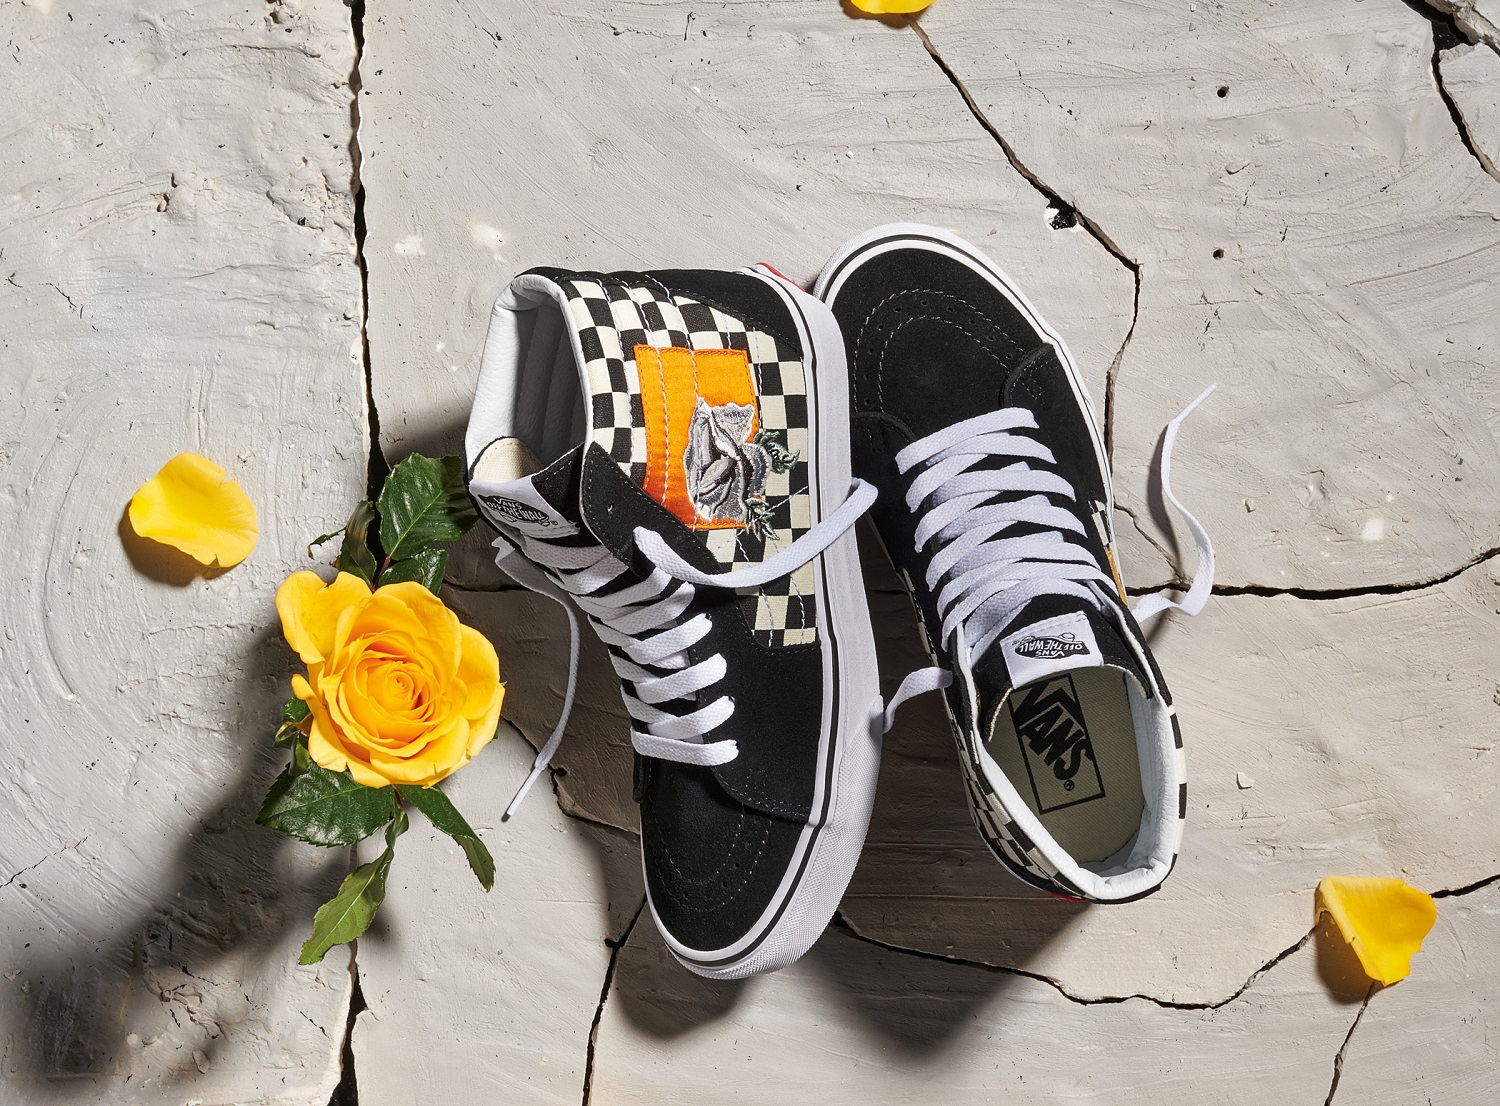 Vans Makes A Sweet Statement With Satin Patchwork Capsule